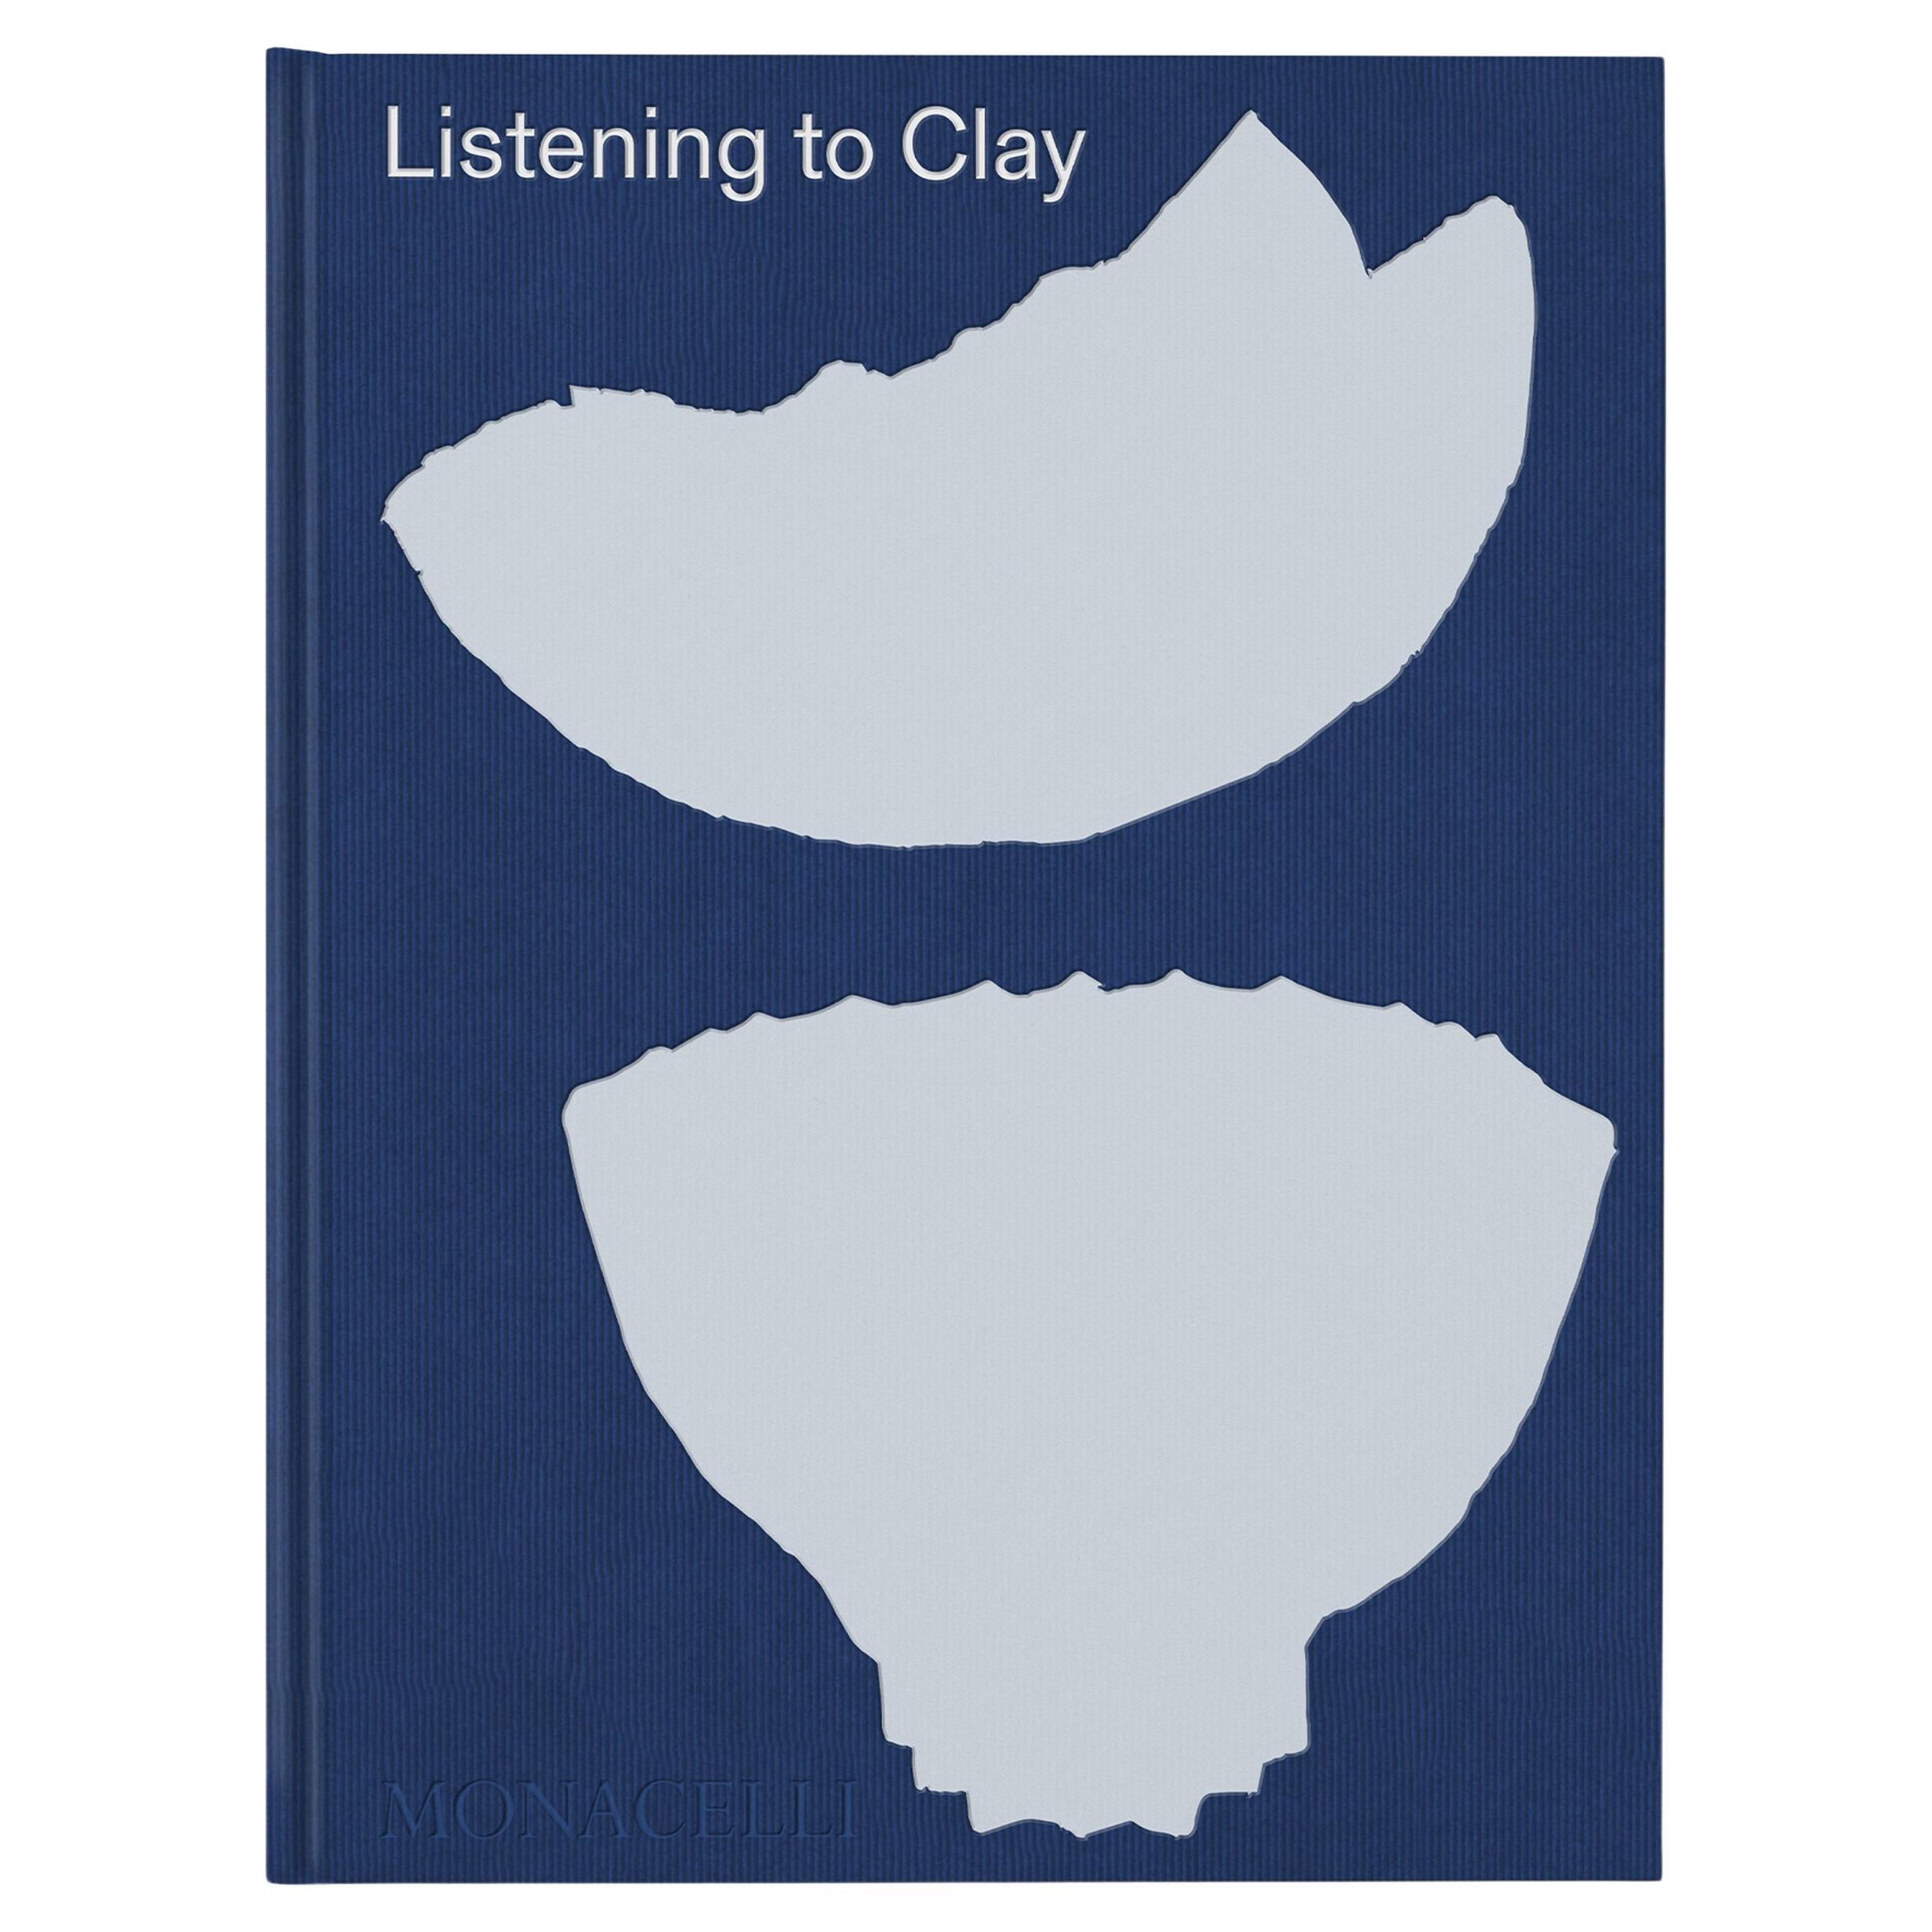 Listening to Clay: Conversations with Conversations with Contemporary Japanese Ceramic Artists